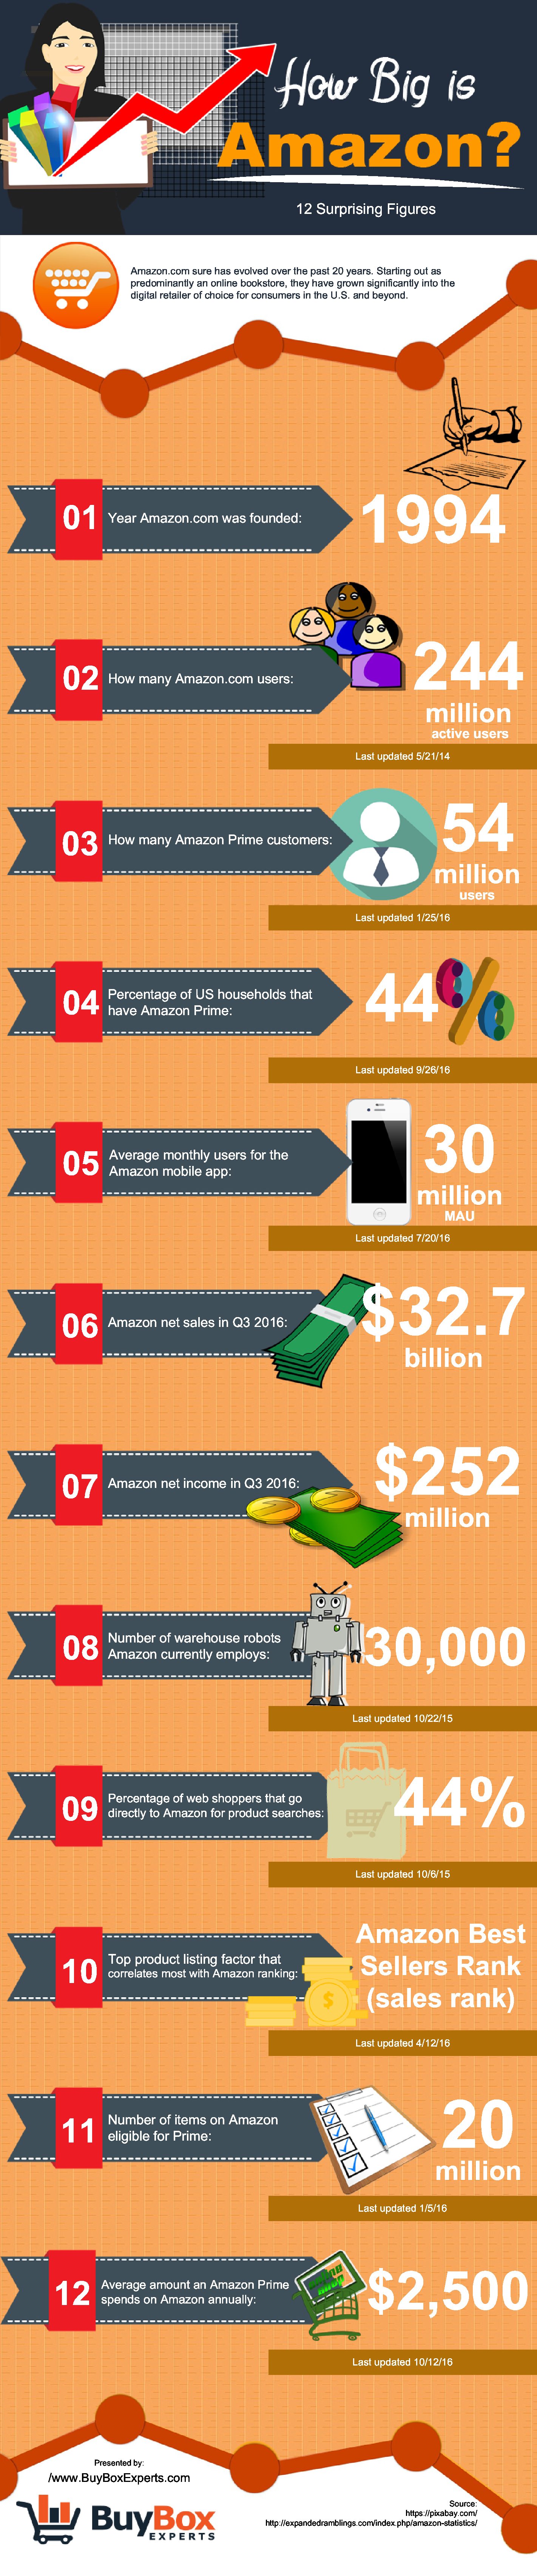 You Won't Believe How Much Amazon Has Grown! - Infographic